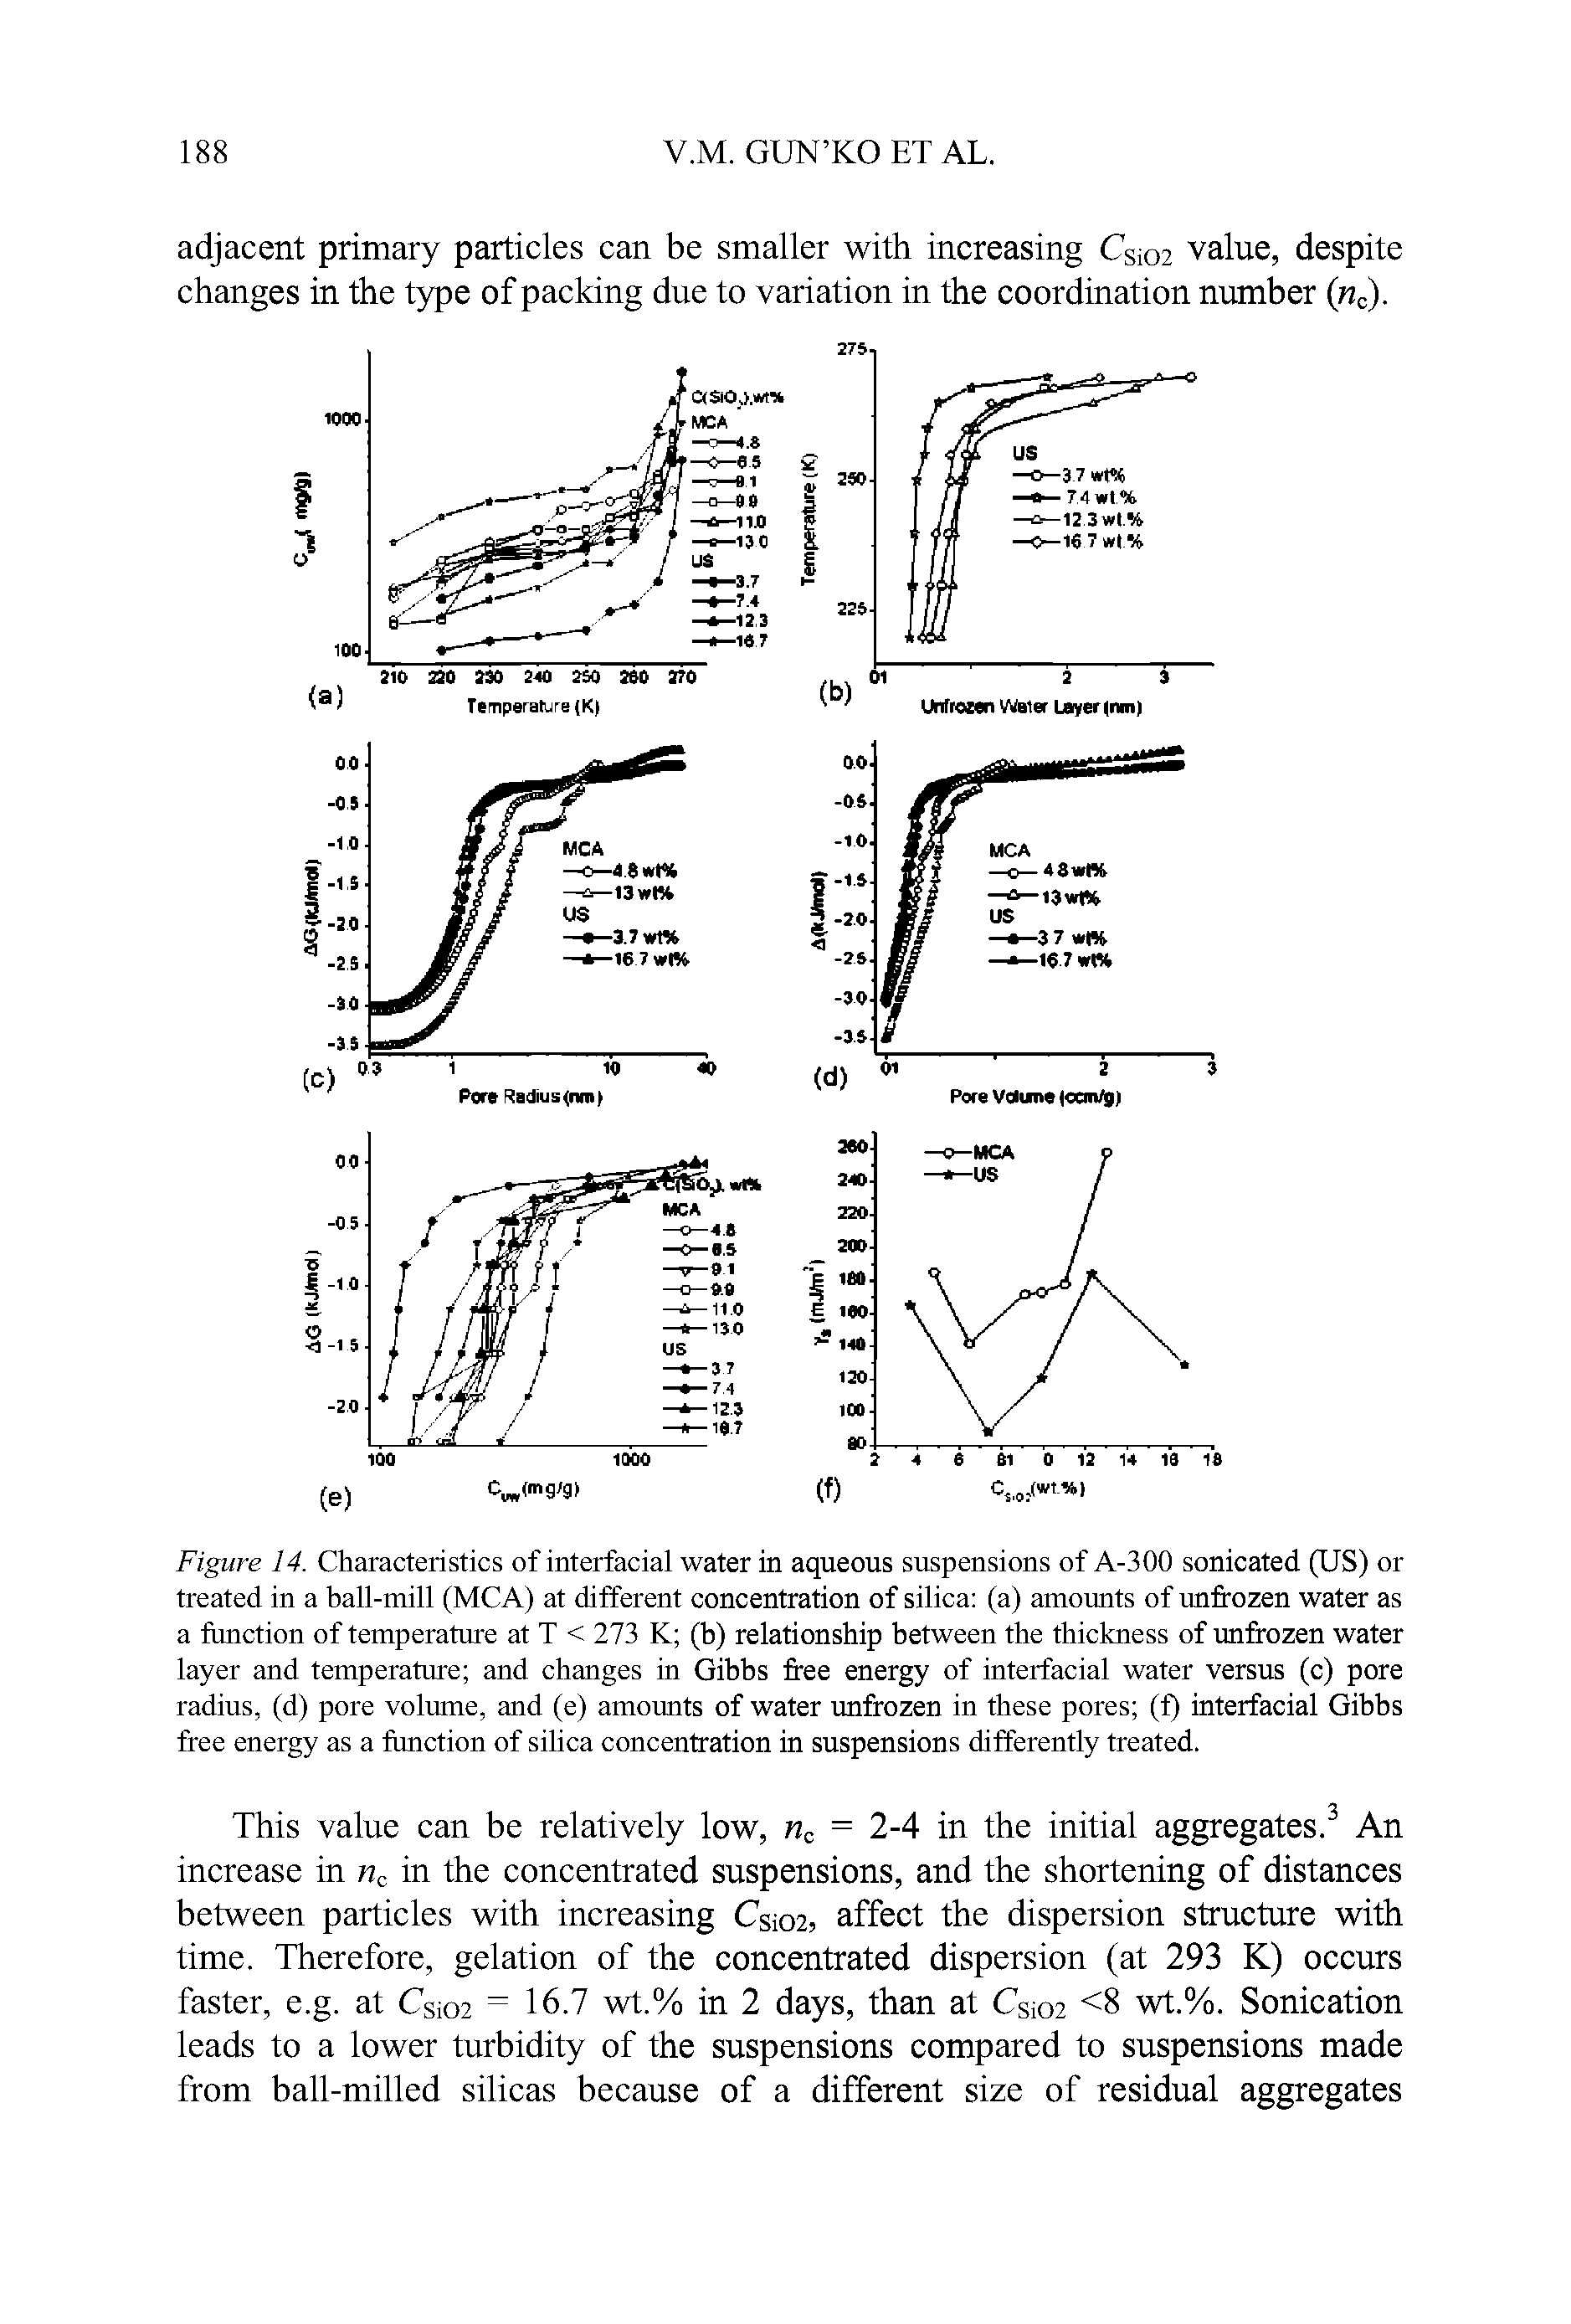 Figure 14. Characteristics of interfacial water in aqueous suspensions of A-300 sonicated (US) or treated in a ball-mill (MCA) at different concentration of silica (a) amounts of unfrozen water as a function of temperature at T < 273 K (b) relationship between the thickness of unfrozen water layer and temperature and changes in Gibbs free energy of interfacial water versus (c) pore radius, (d) pore volume, and (e) amounts of water unfrozen in these pores (f) interfacial Gibbs free energy as a function of silica concentration in suspensions differently treated.